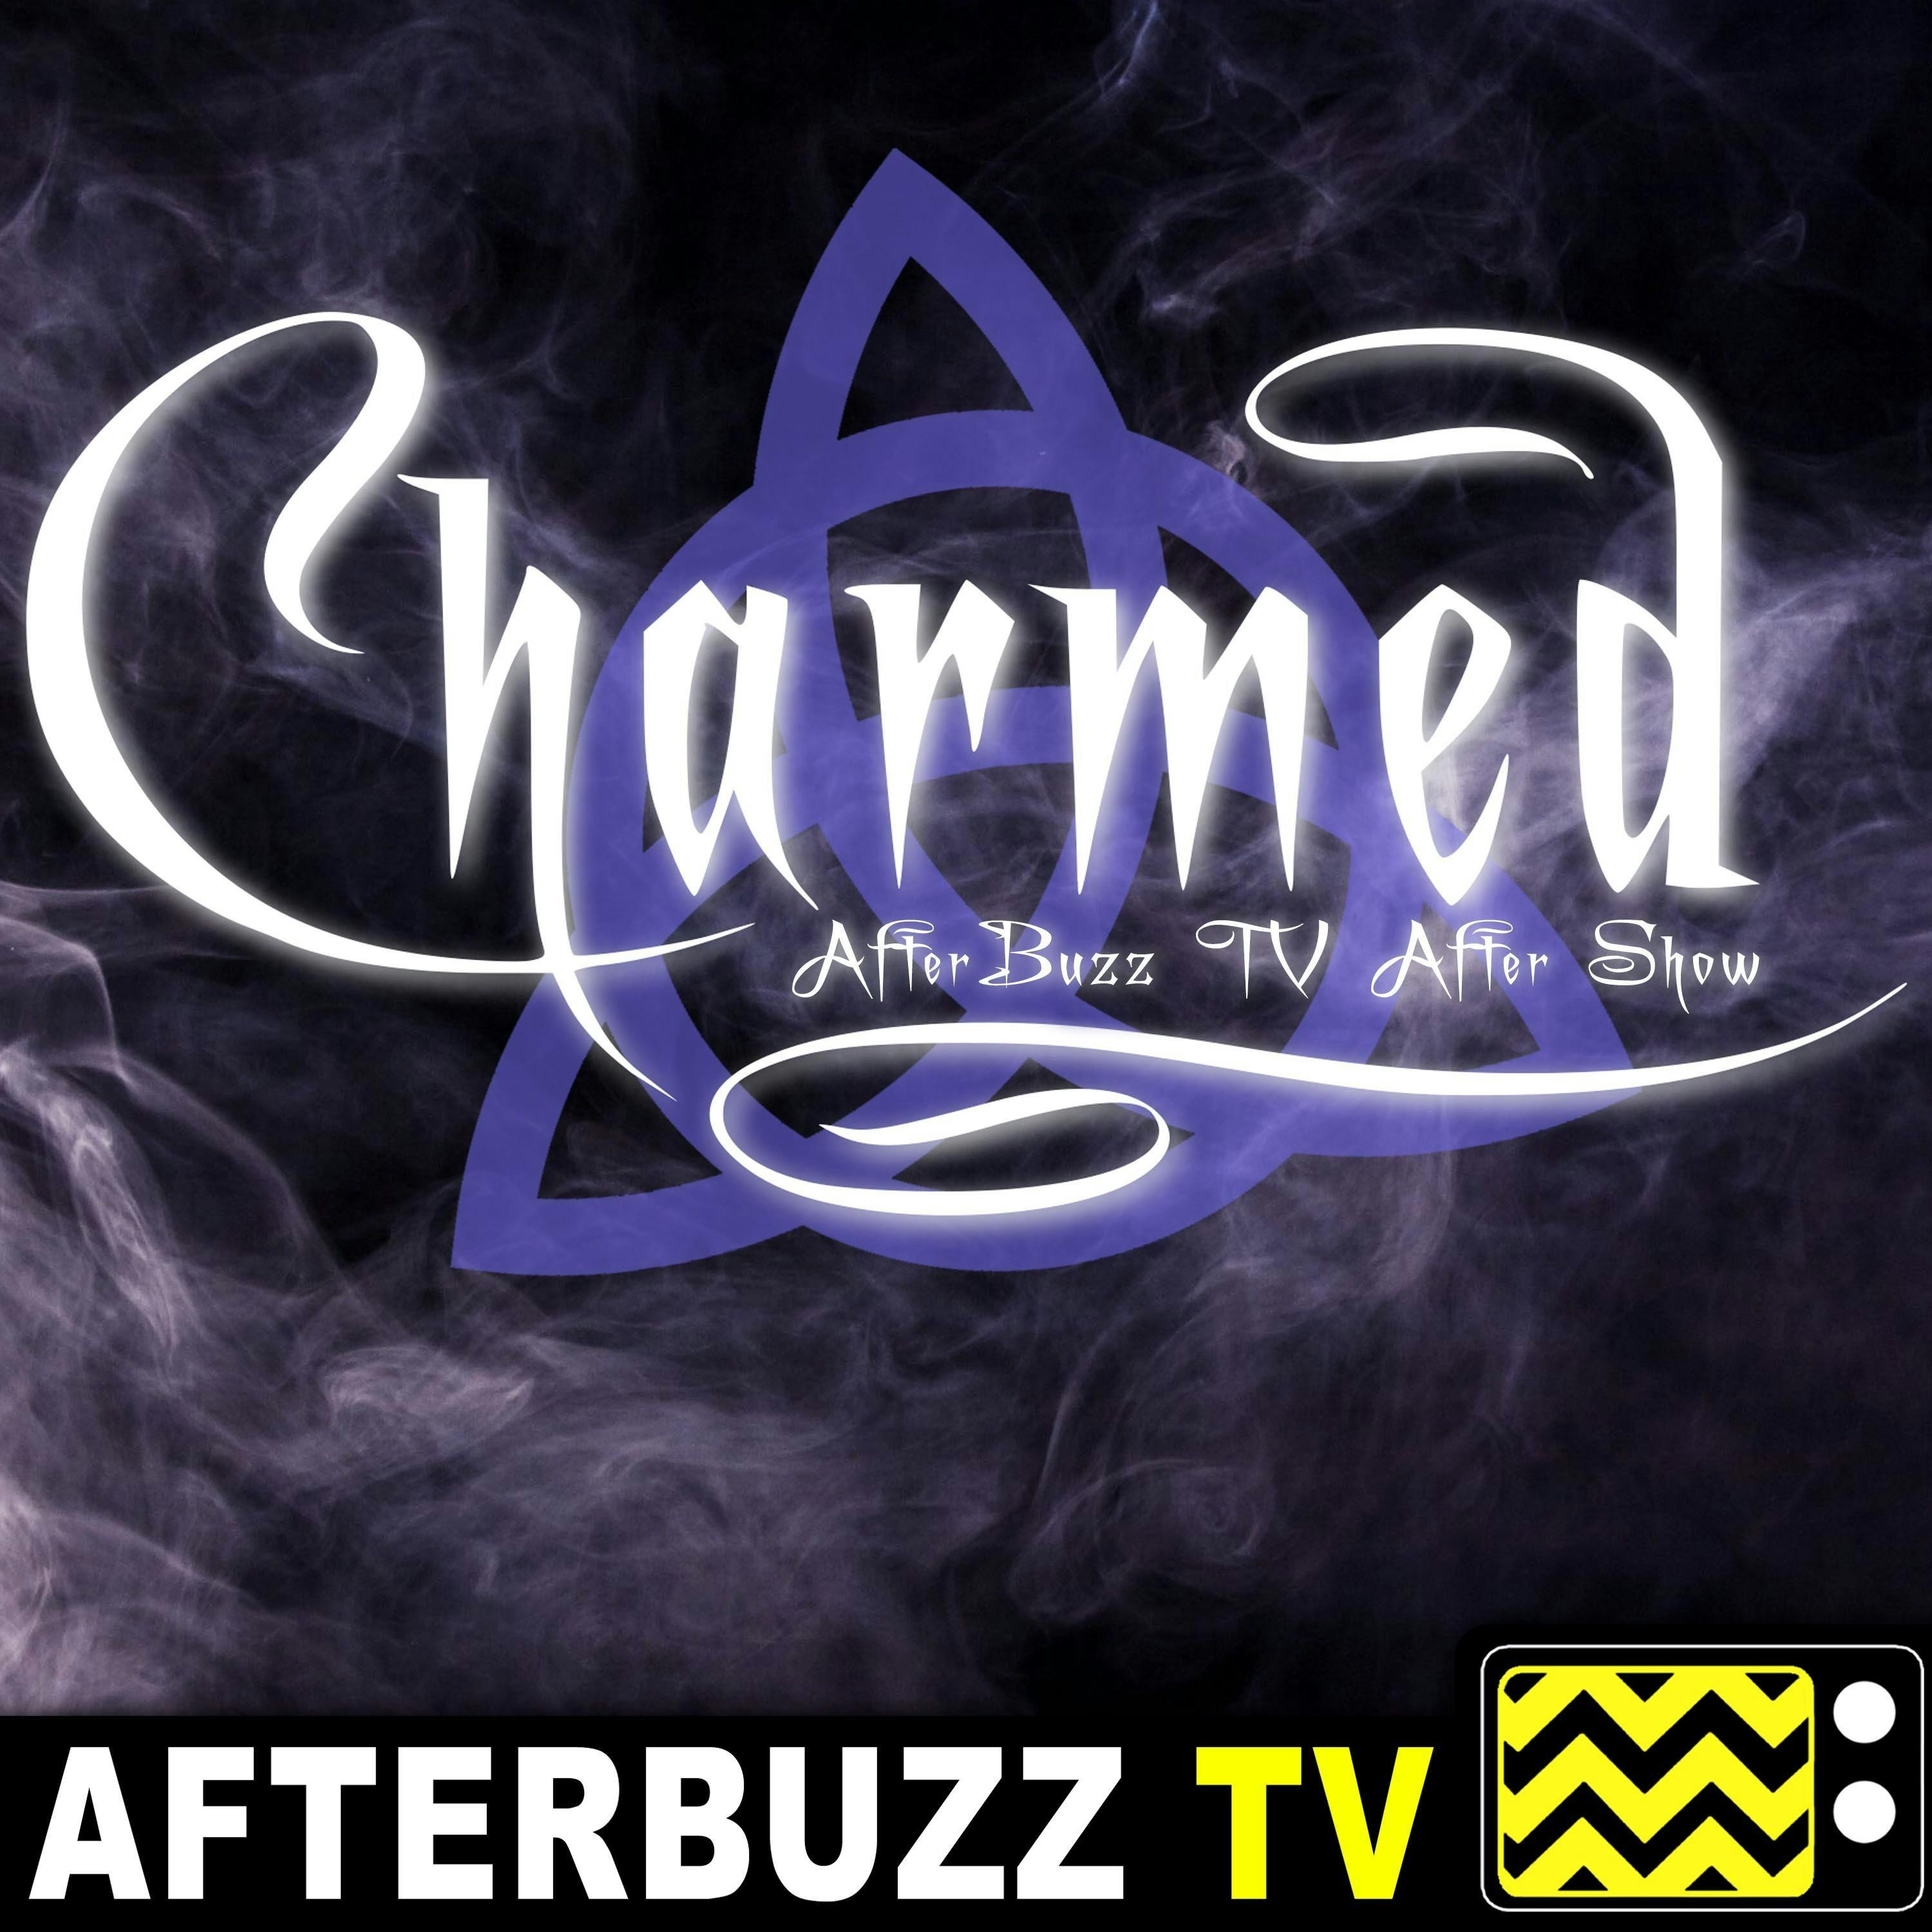 Charmed S:1 Witch Perfect E:11 Review